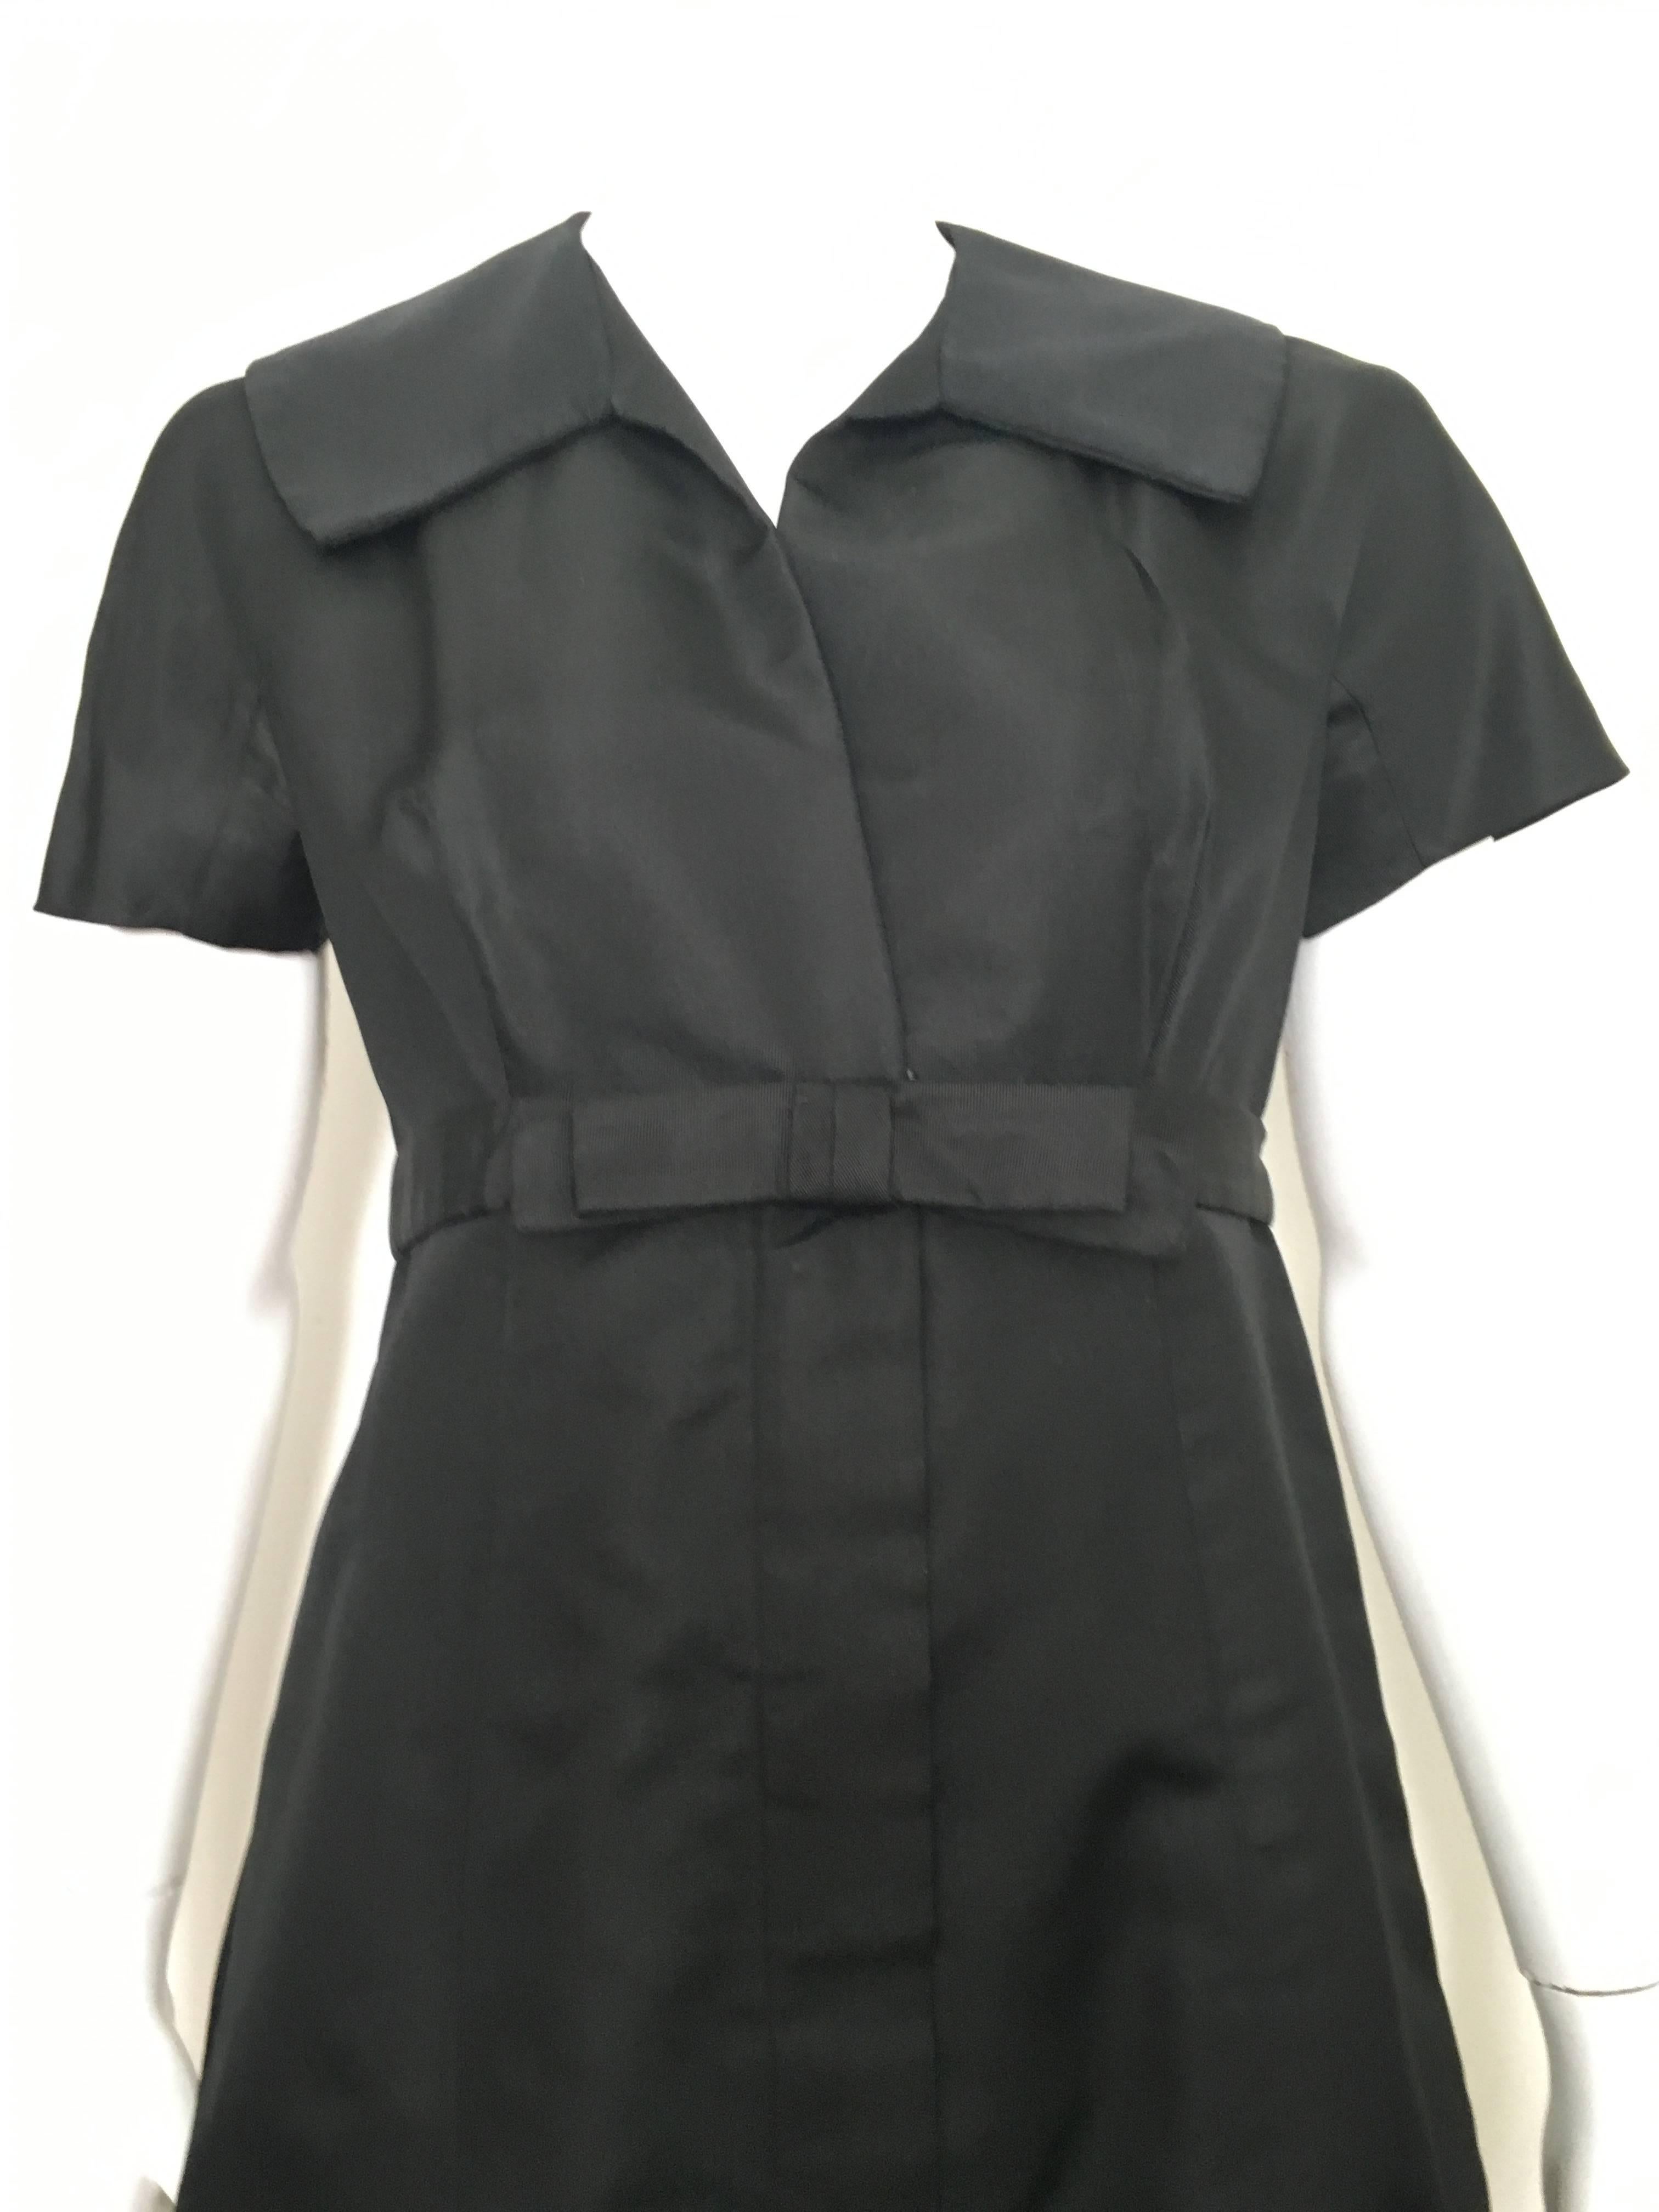 Malcolm Charles designed by Frank Adams 1960s short sleeve black silk taffeta dress is a size 6. Ladies please pull out your measuring tape so you can properly measure your bust, waist & hips to make certain this vintage treasure will fit your